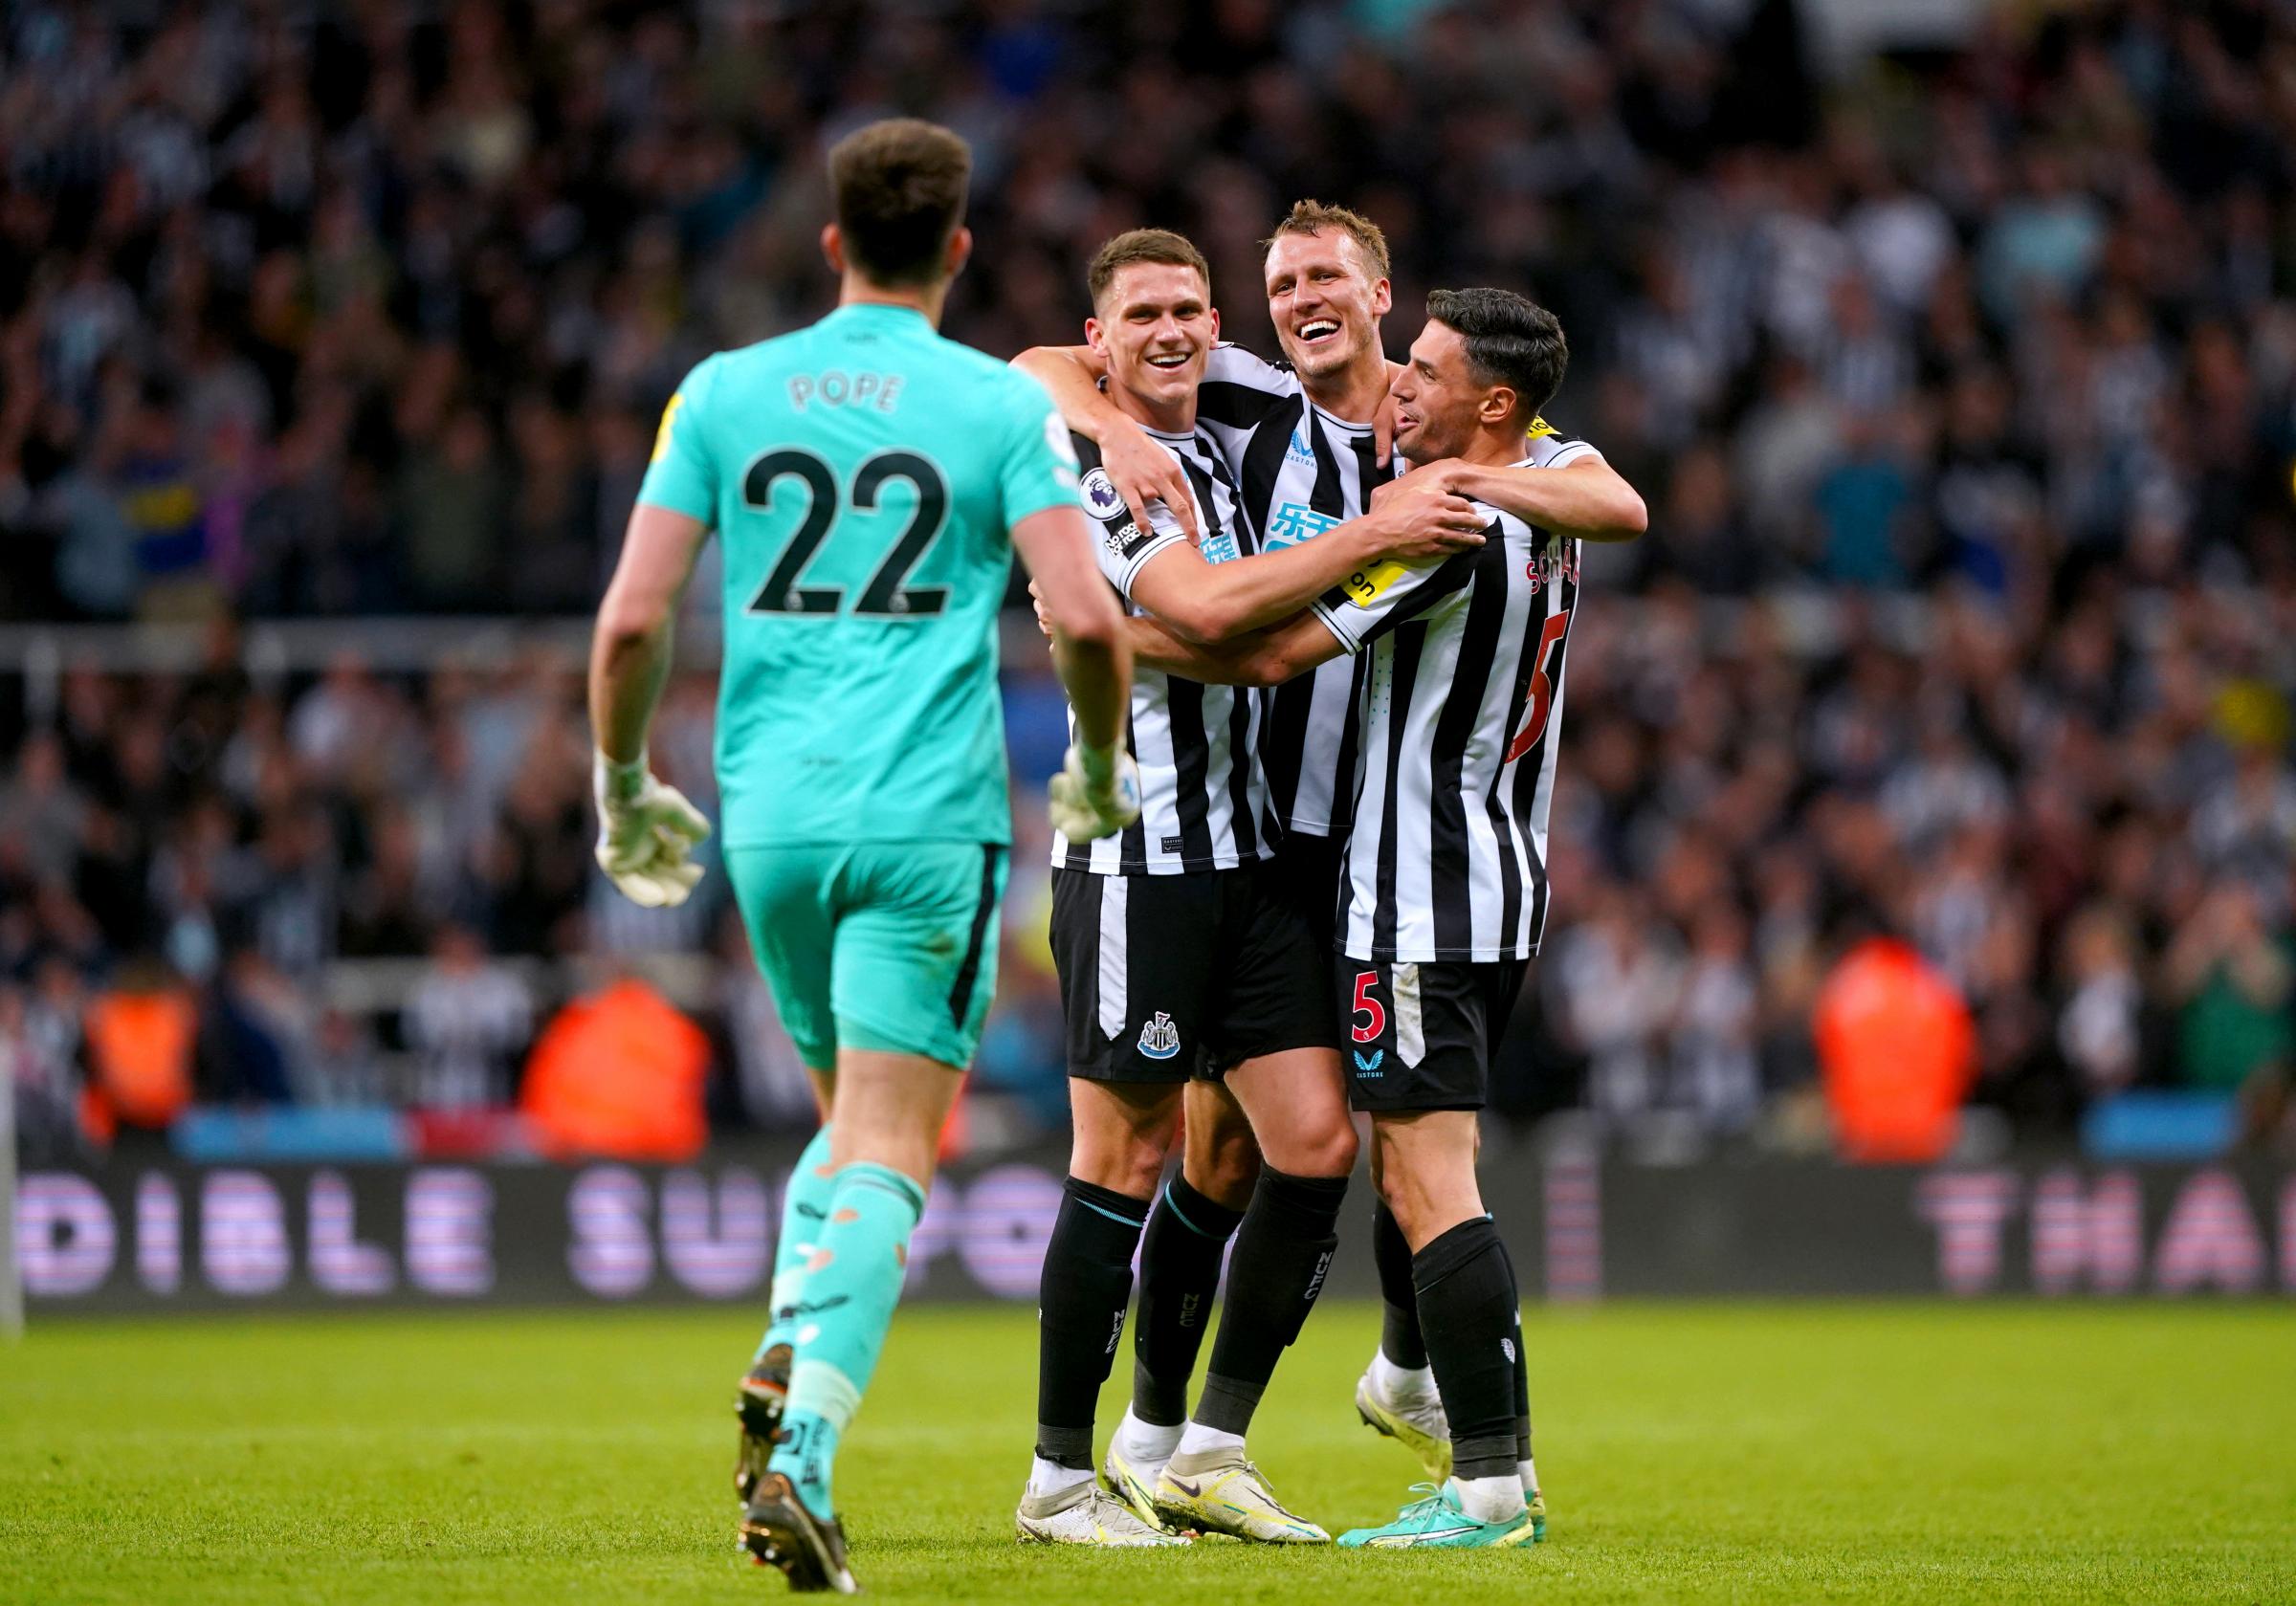 Match Ratings: Newcastle United 0 Leicester City 0 - Anderson star man